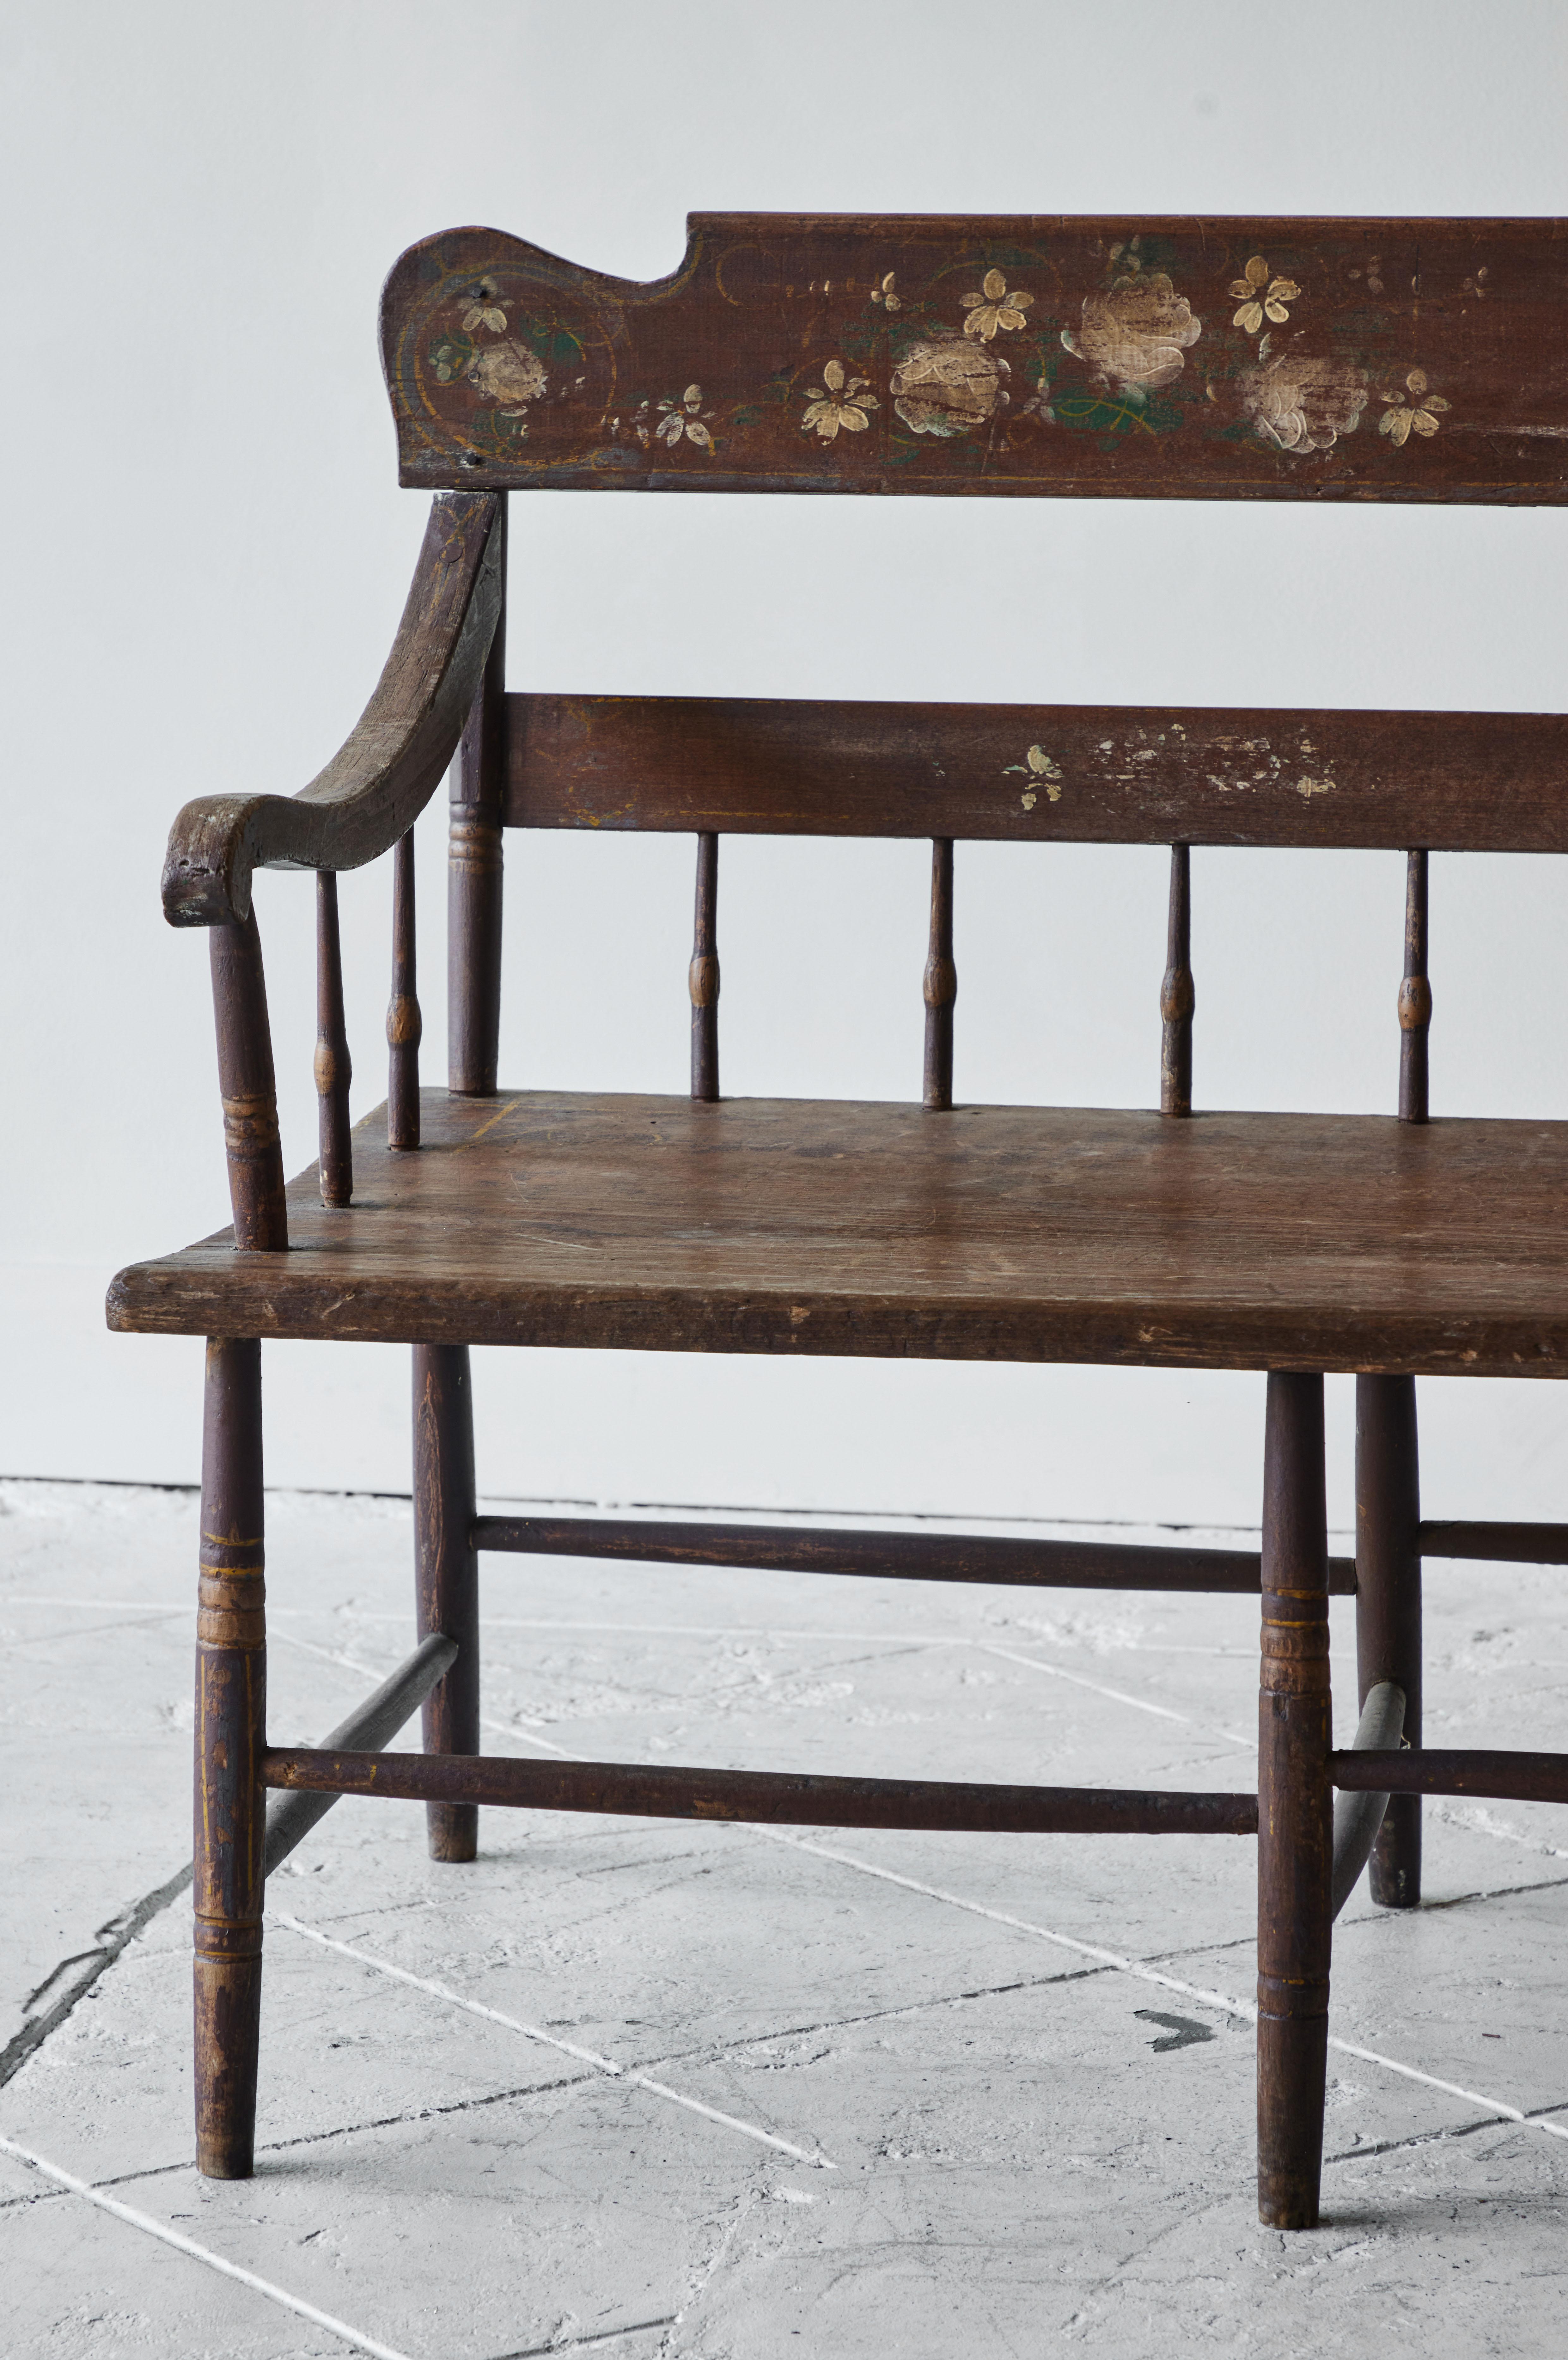 A stunning paint-decorated, Pennsylvania, plank-seat settee from the mid-19th century. This piece features a half-spindle-back style with an intricate crest rail and is curved slightly at the shoulders. This design is typical of rural Pennsylvania